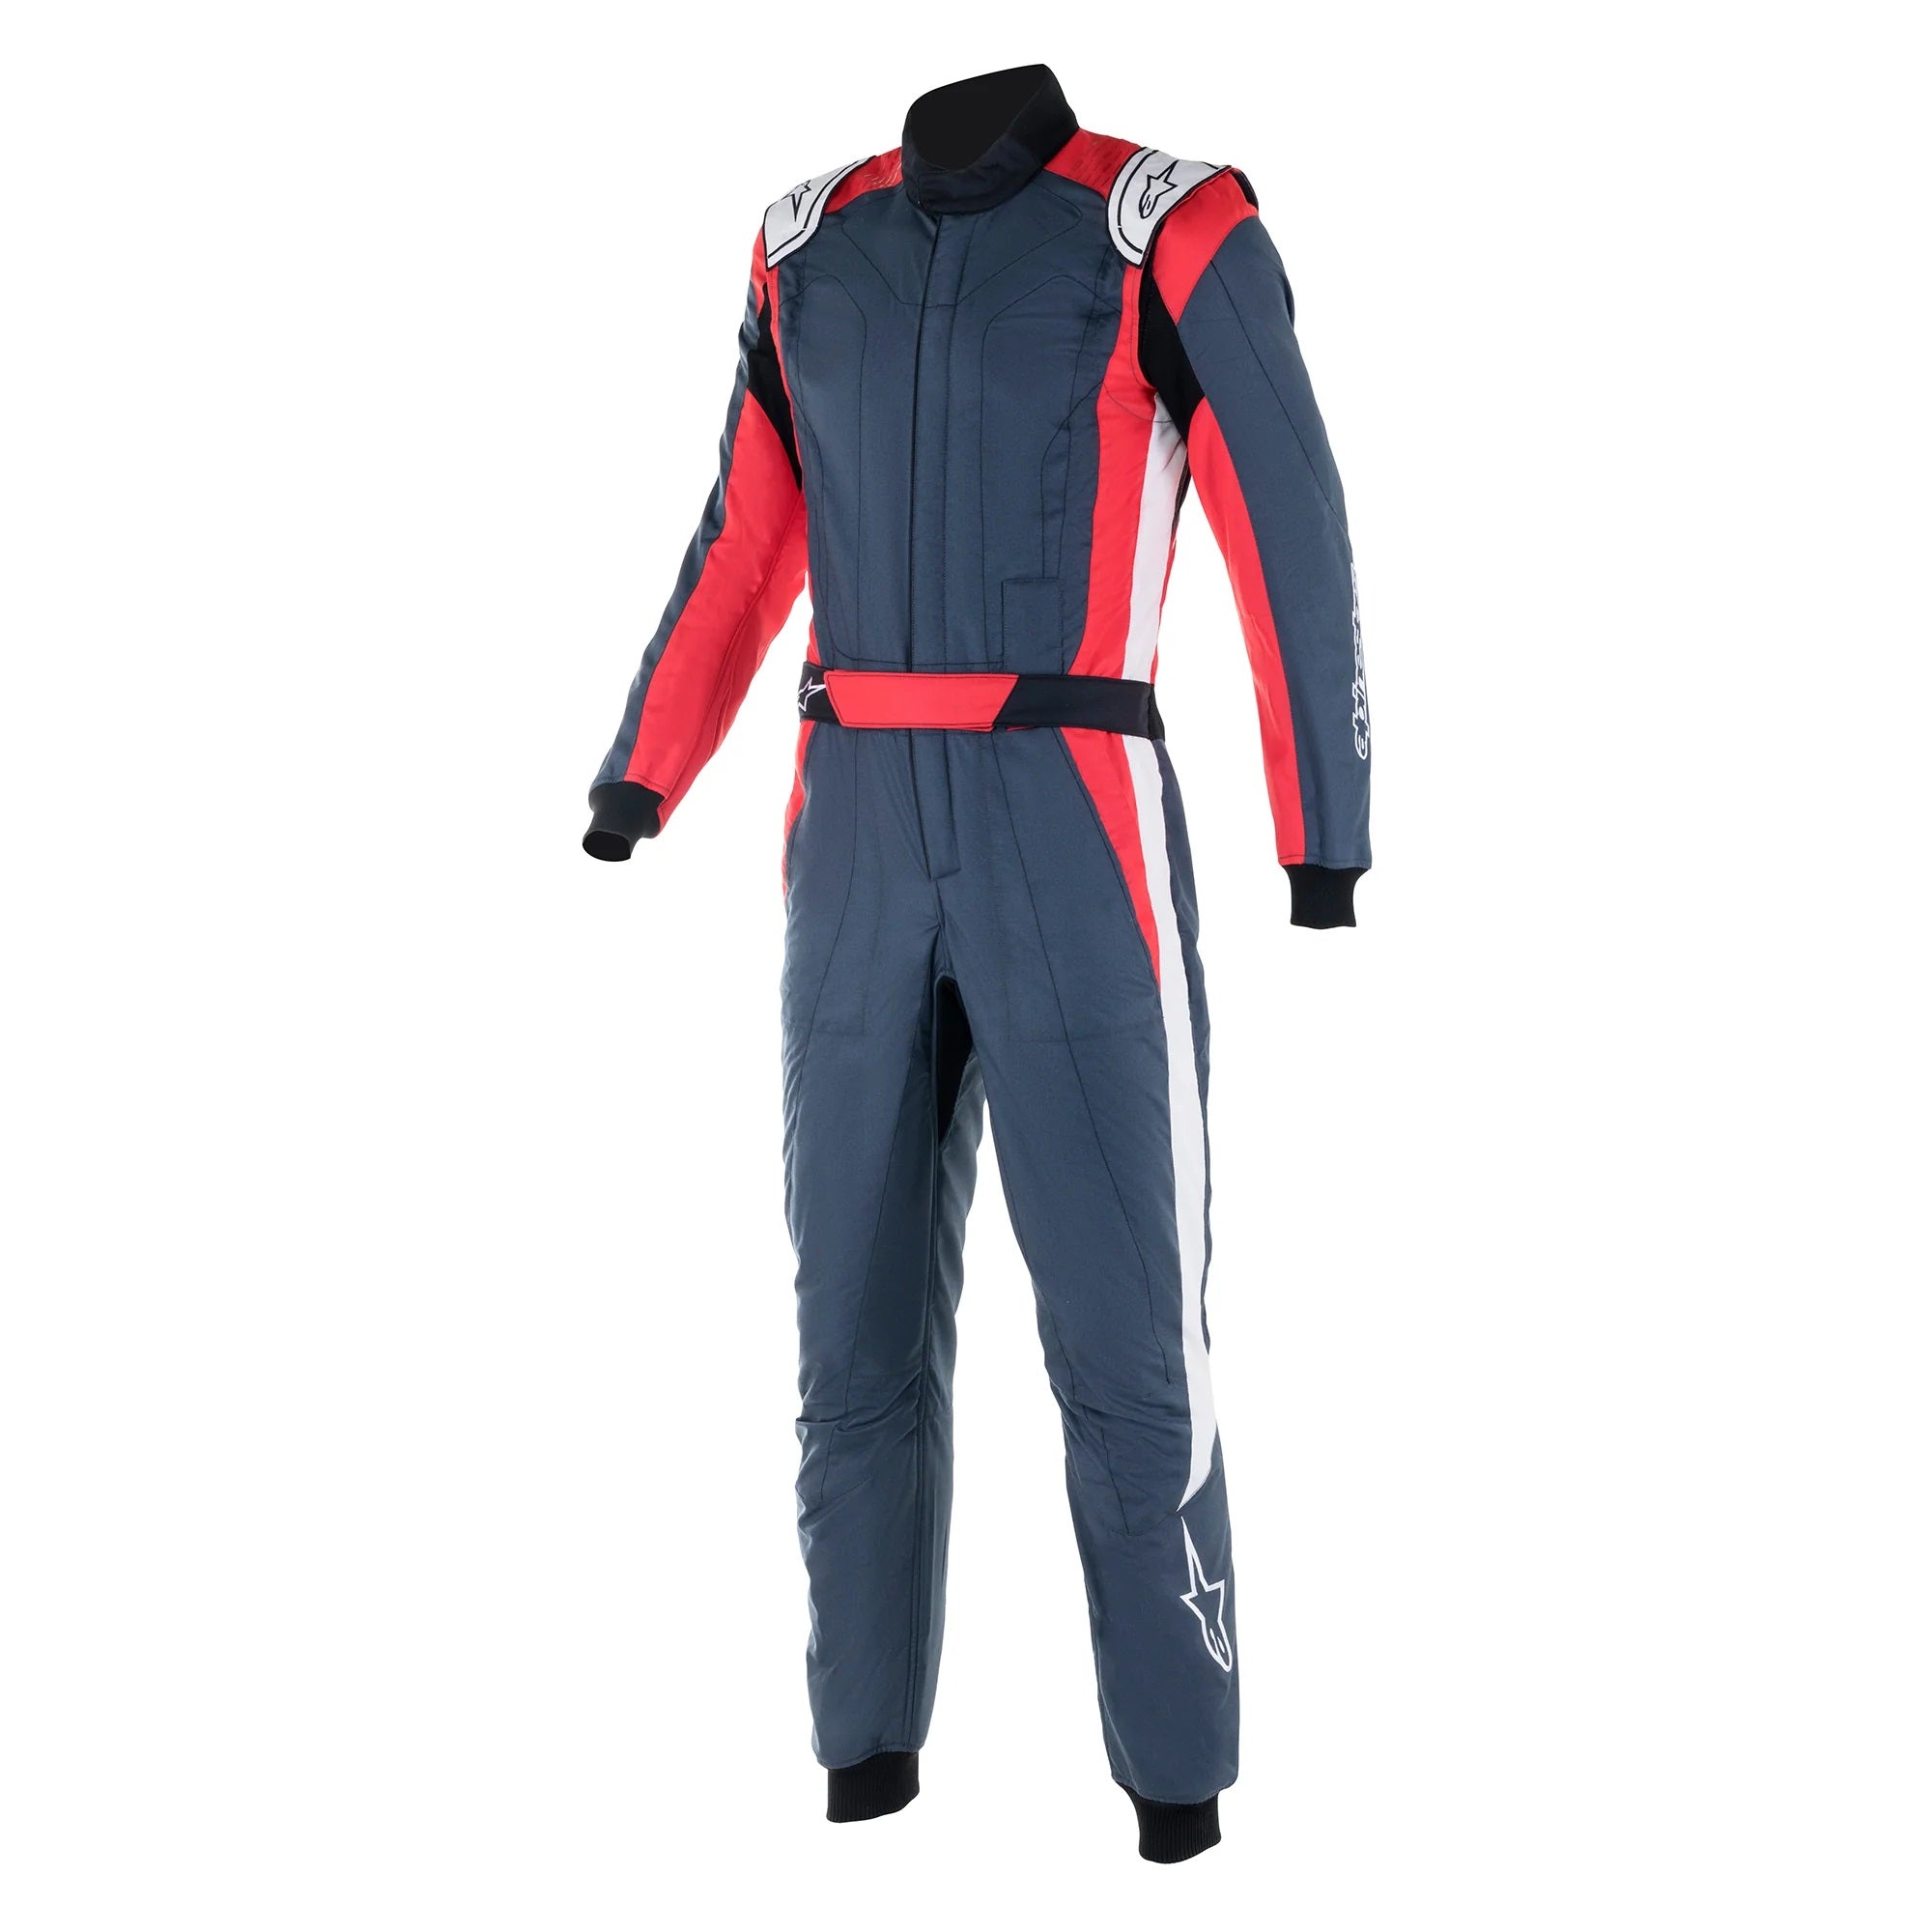 Alpinestars Knoxville v2 Suit – Winding Road Racing